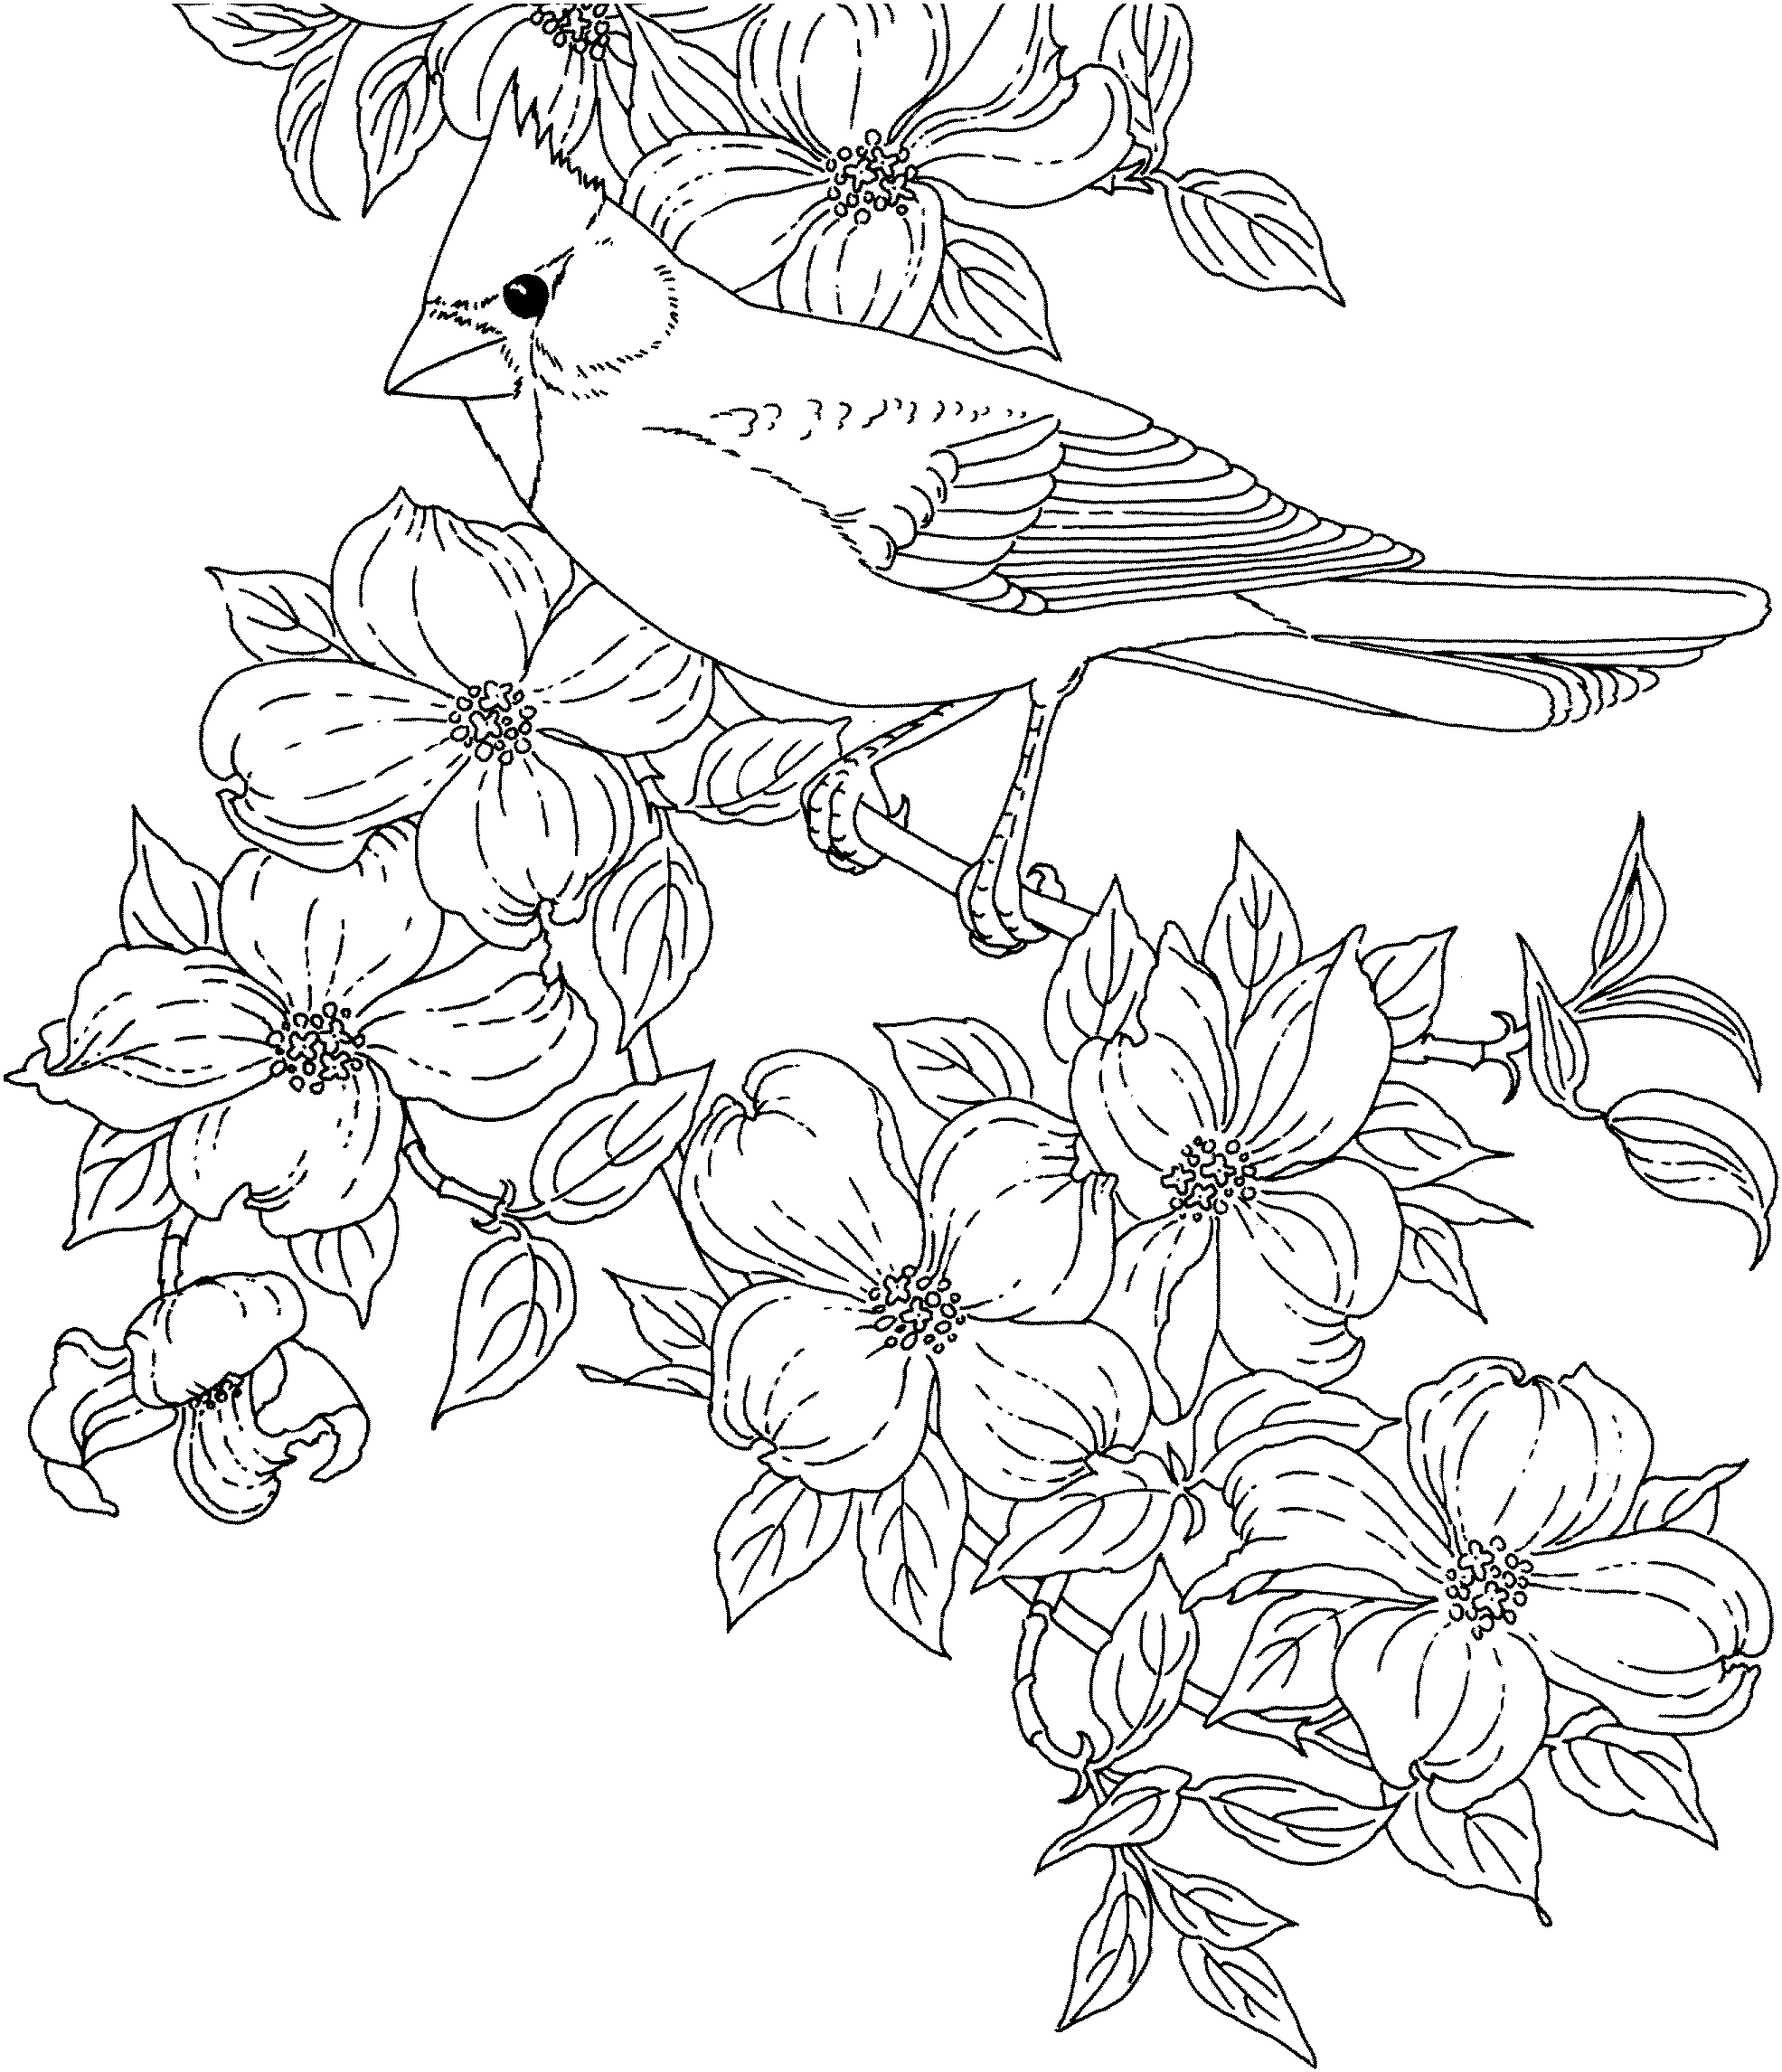 Clip Arts Related To : line drawing birds with flower. view all Birds And F...